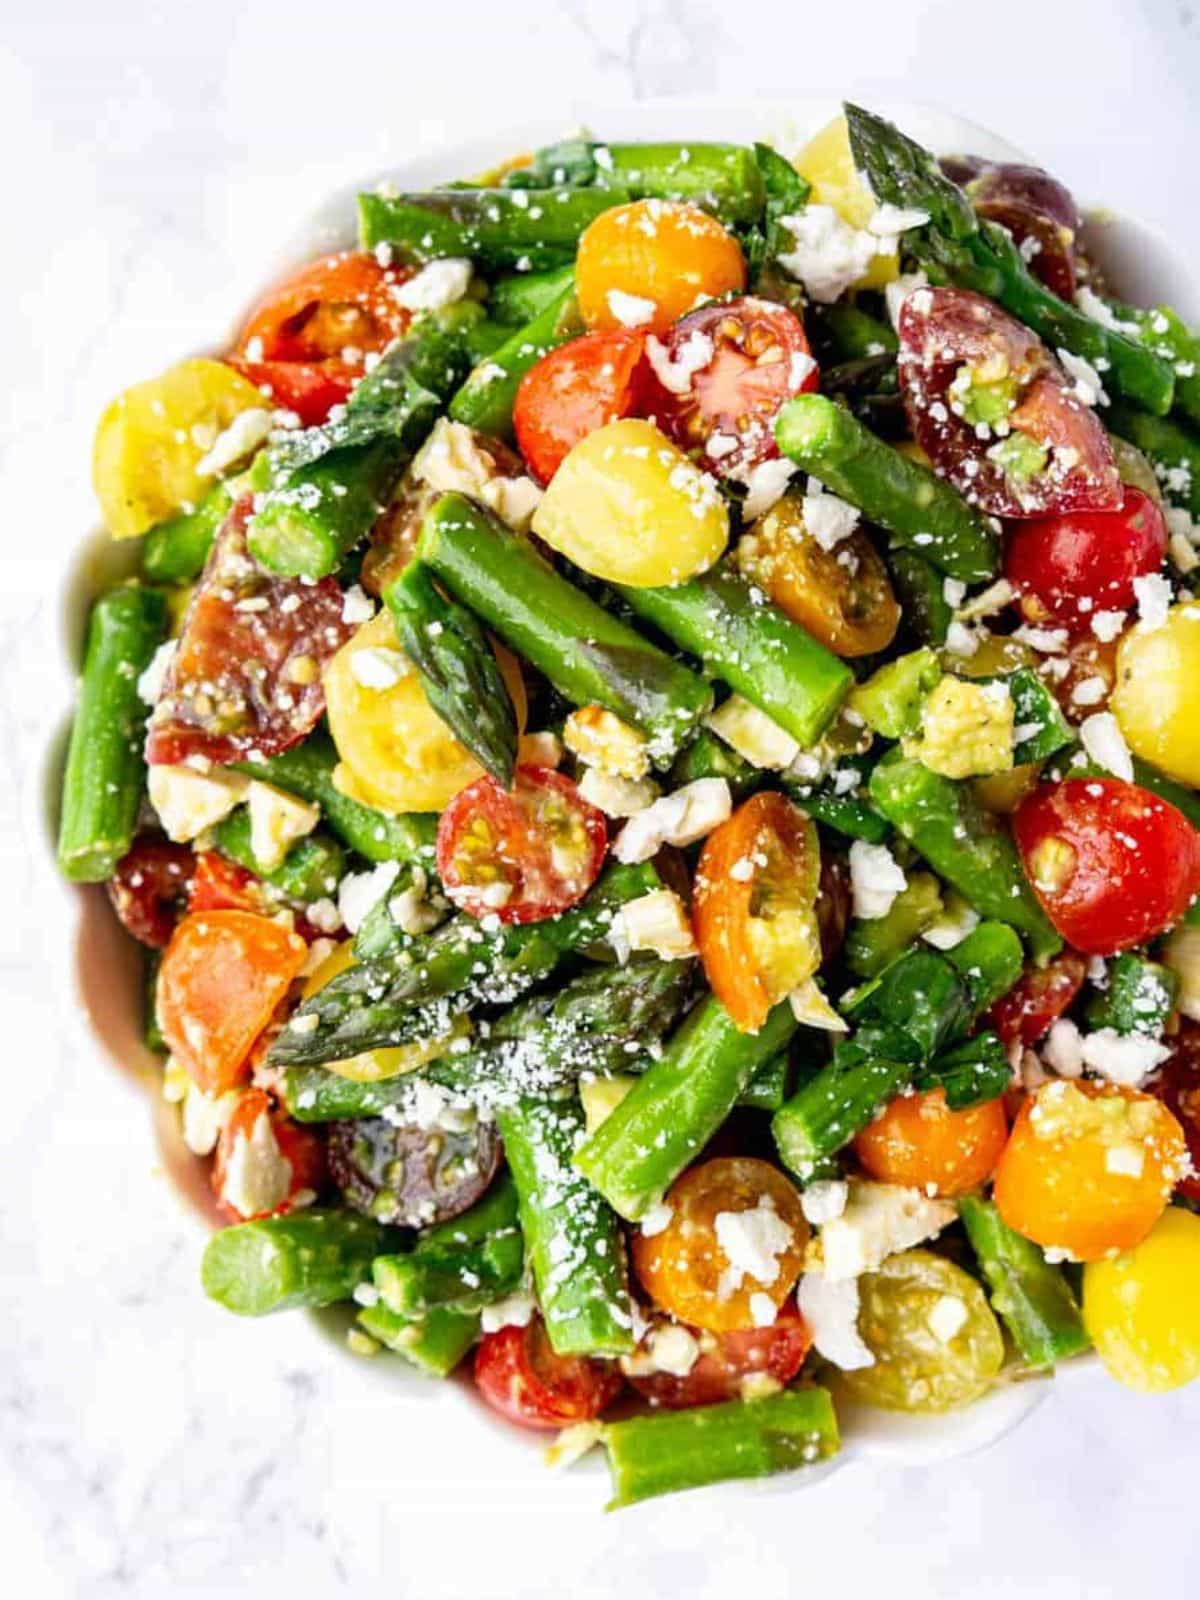 Cold asparagus and tomato salad in a white bowl